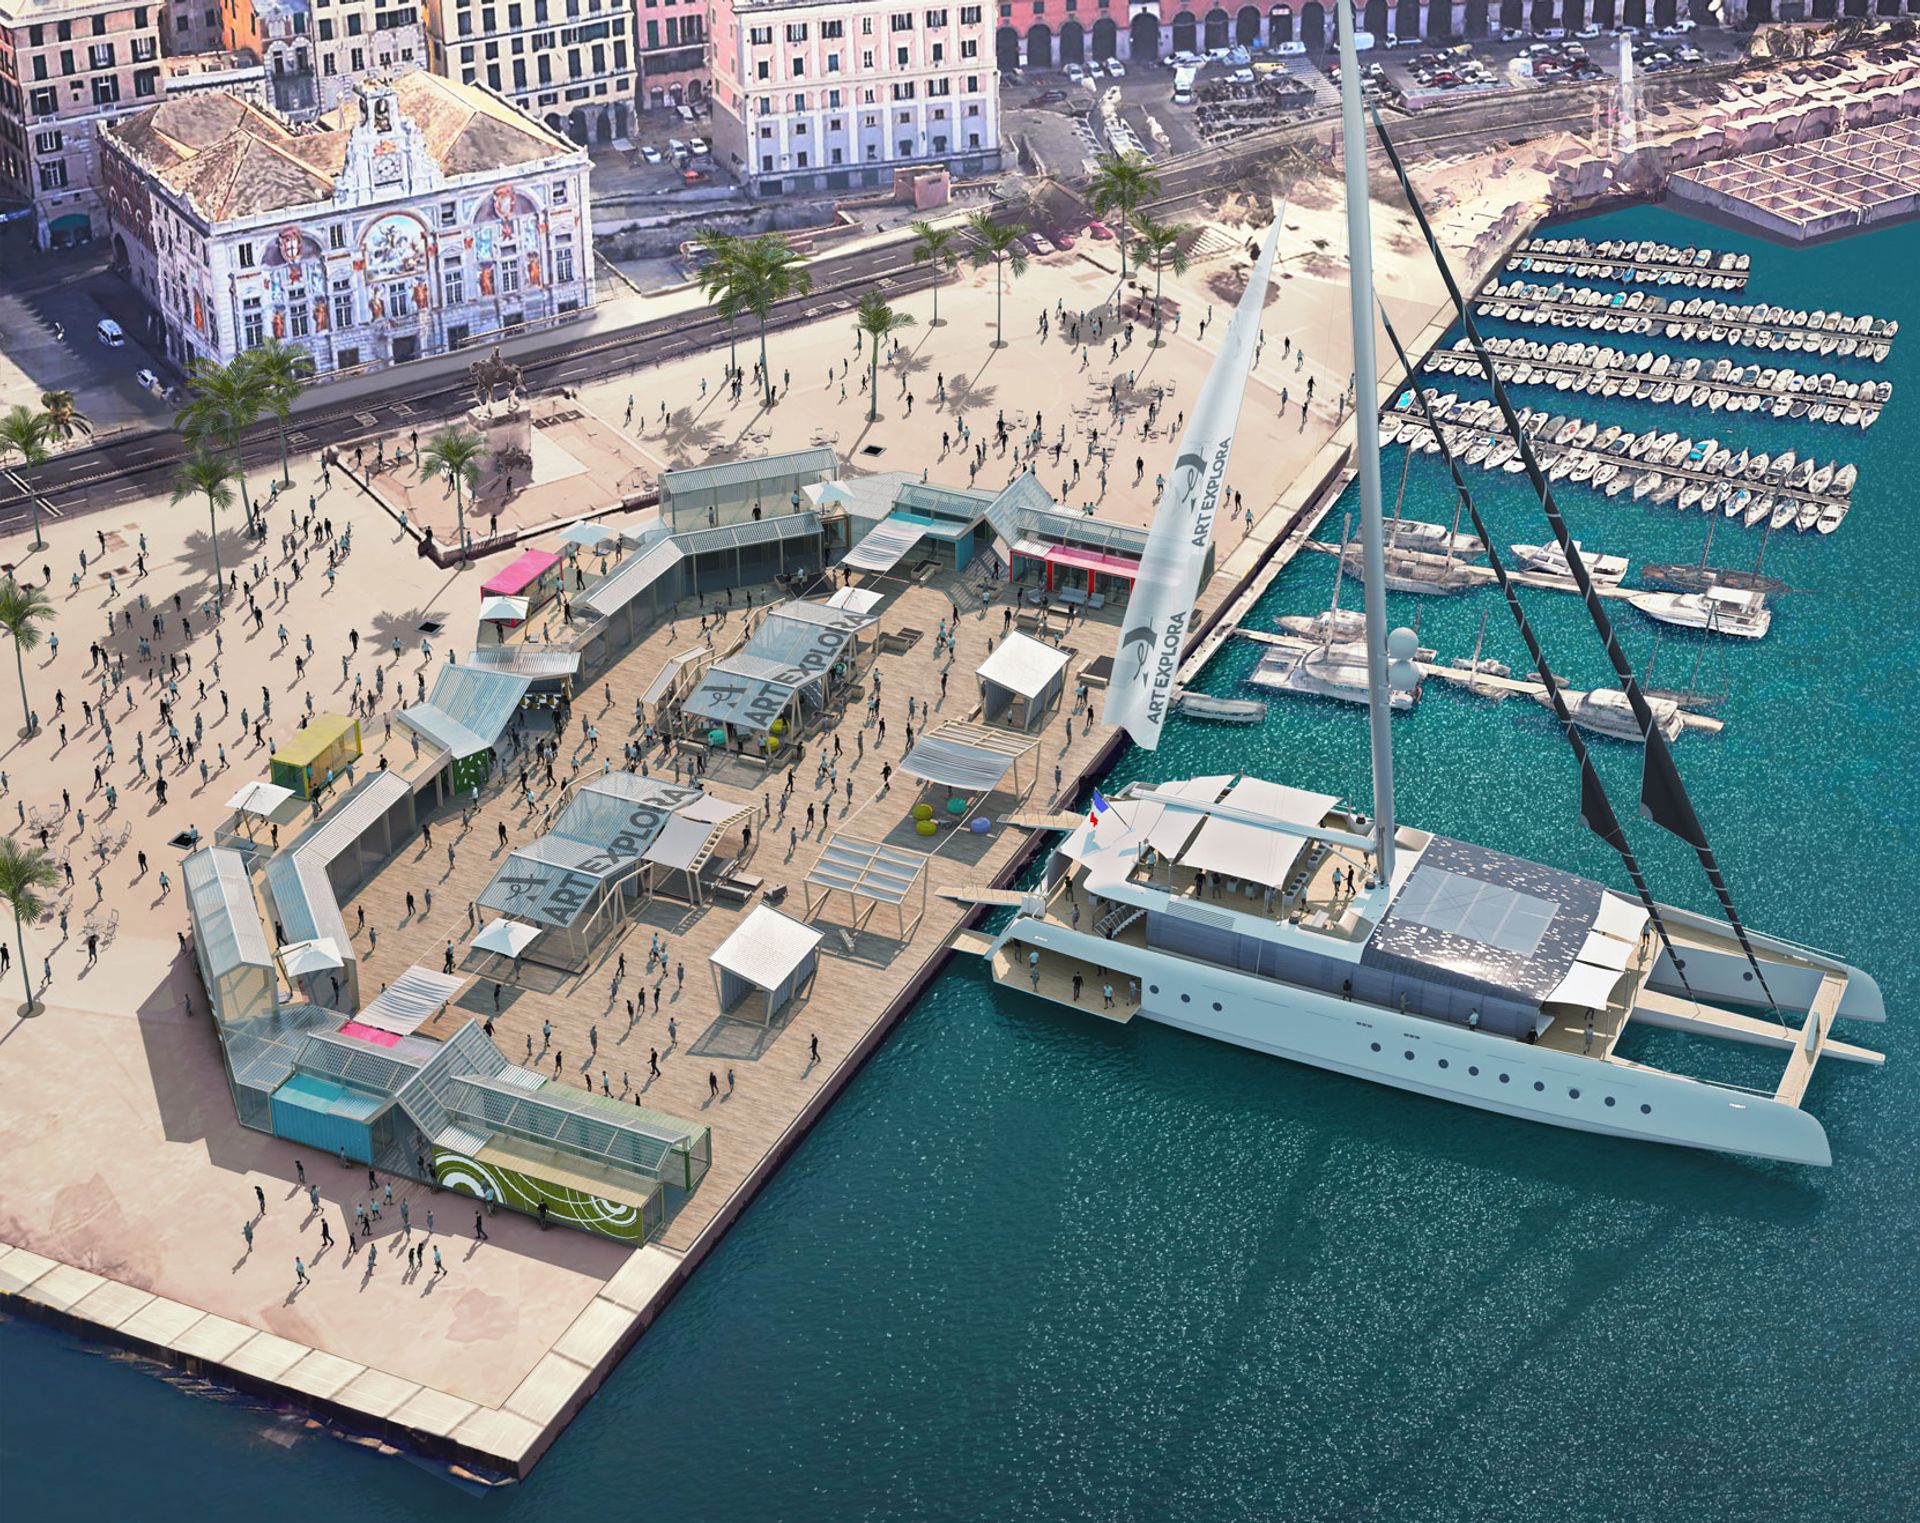 One of the world's largest catamarans will set sail as a mobile digital museum in autumn 2023, backed by the French entrepreneur and arts patron Frédéric Jousset Rendering: courtesy of Art Explora